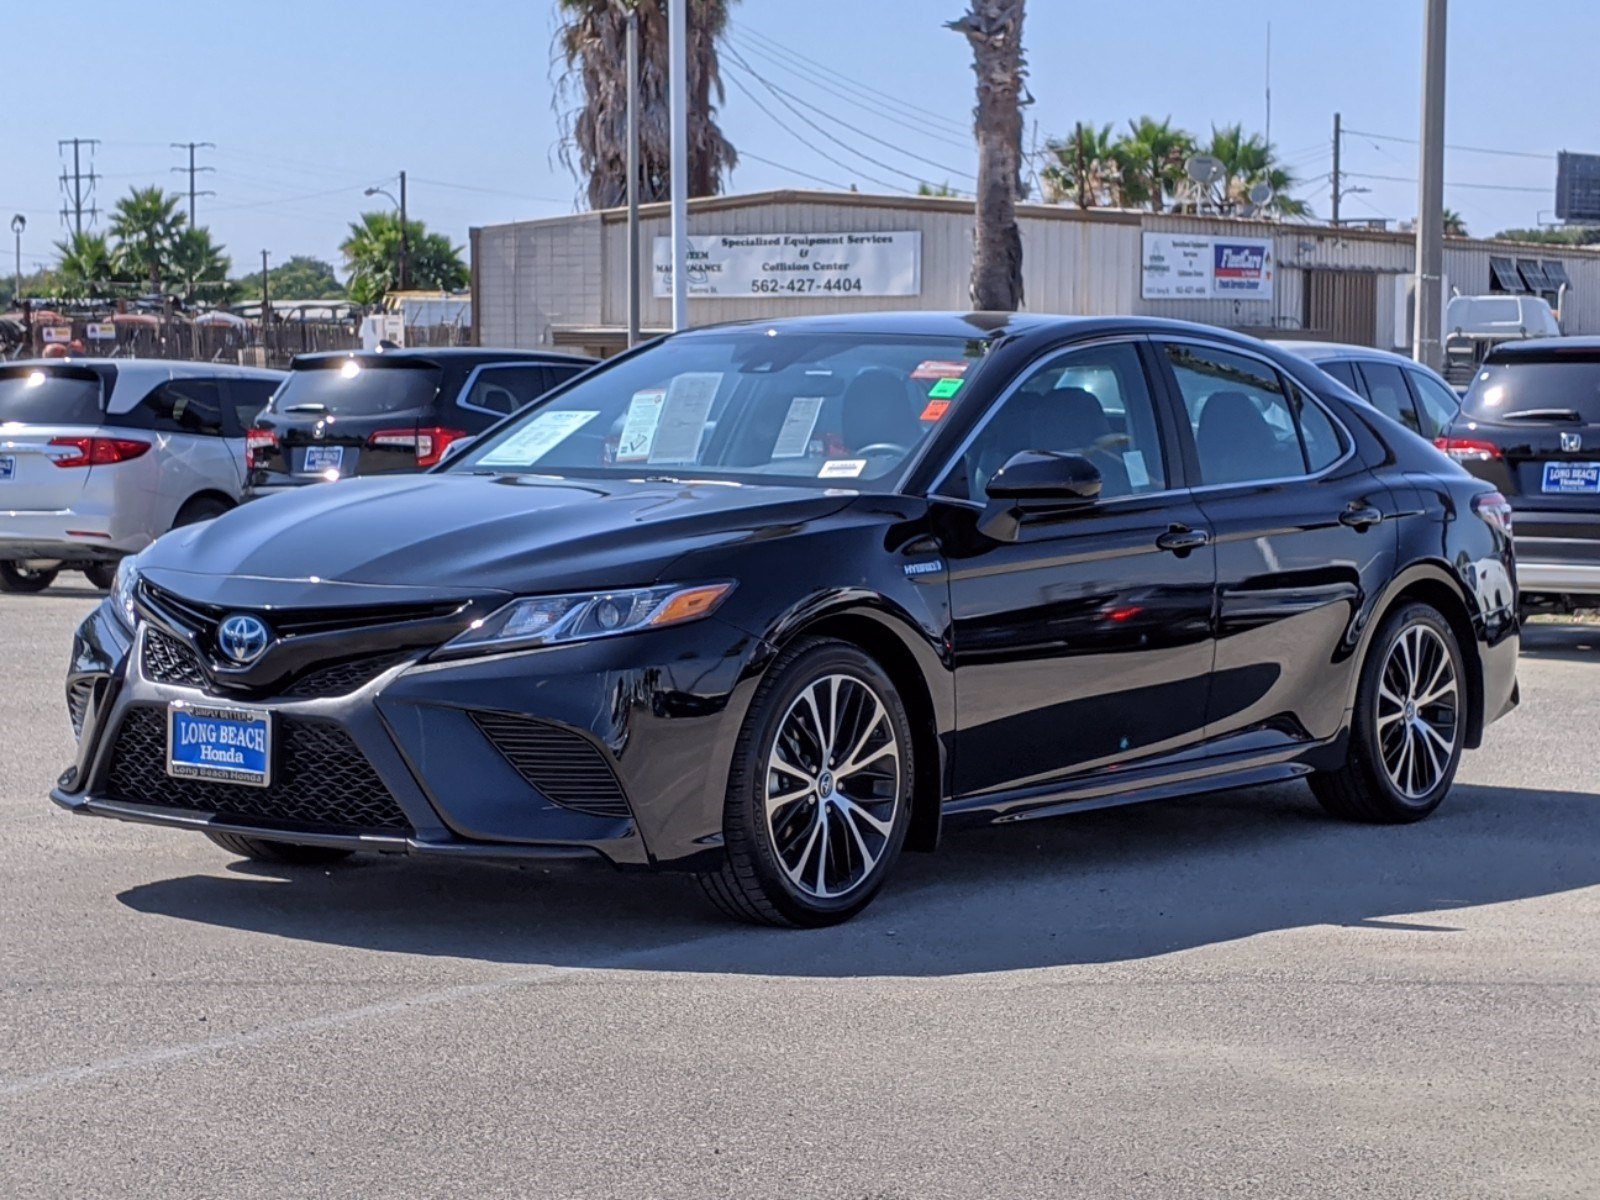 PreOwned 2019 Toyota Camry Hybrid SE 4dr Car in Signal